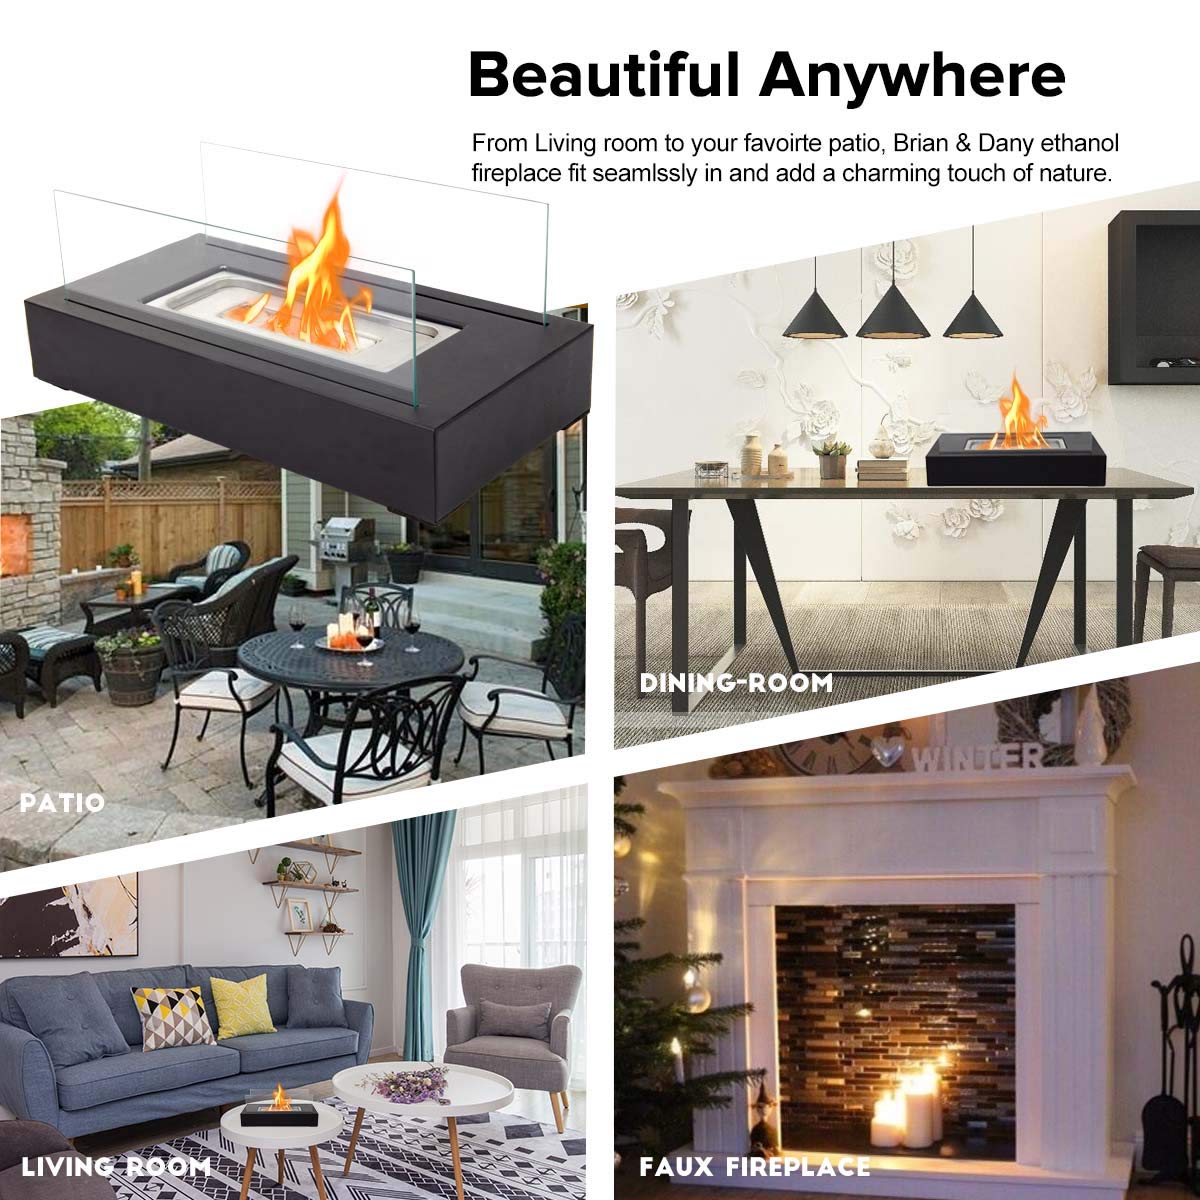 Portable Gas Fireplace Indoor Unique Brian & Dany Ventless Tabletop Portable Fire Bowl Pot Bio Ethanol Fireplace Indoor Outdoor Fire Pit In Black W Fire Killer and Funnel